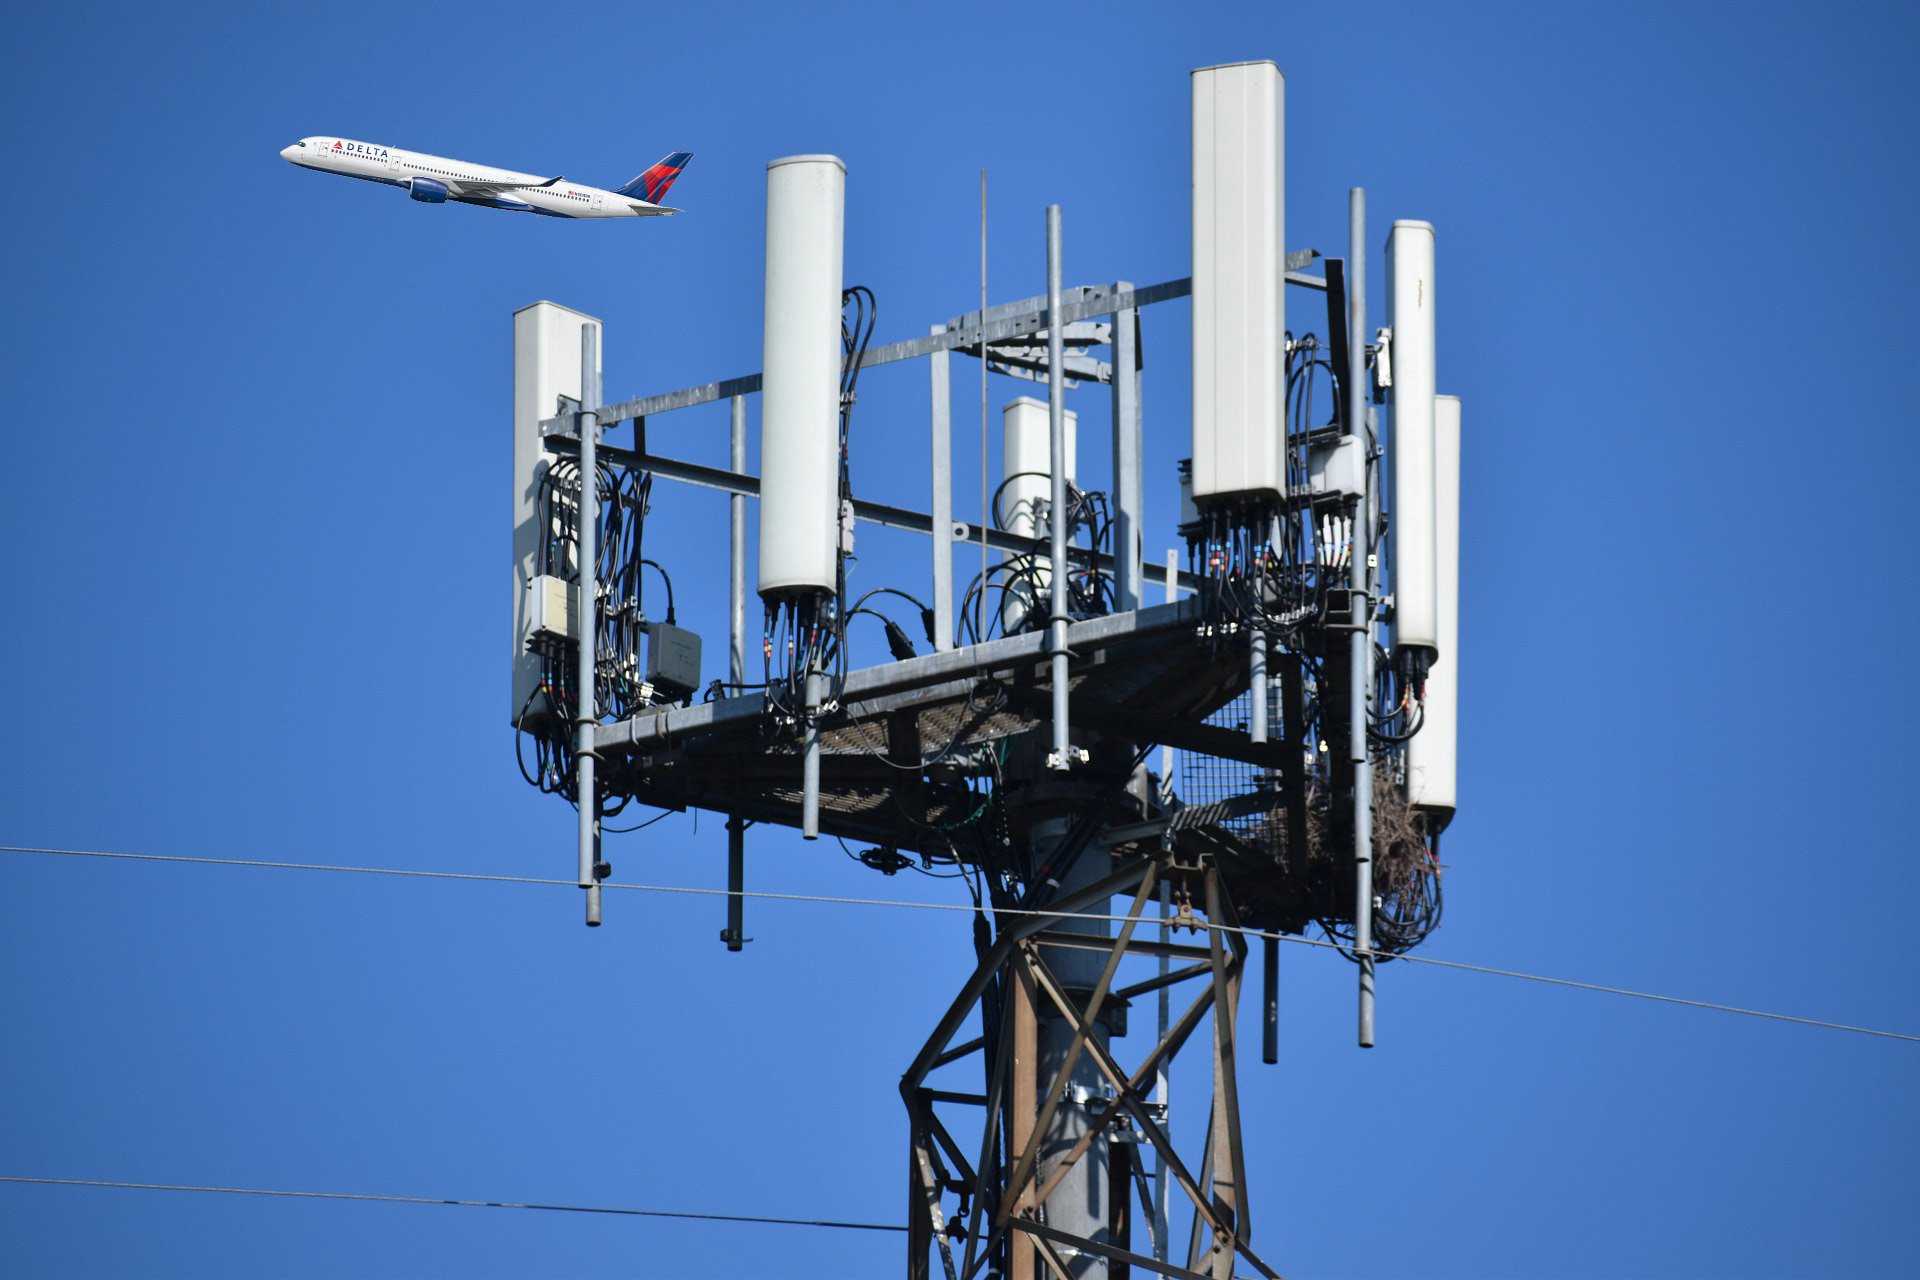 US DOT and FAA ask AT&T and Verizon to delay rollout of new 5G service